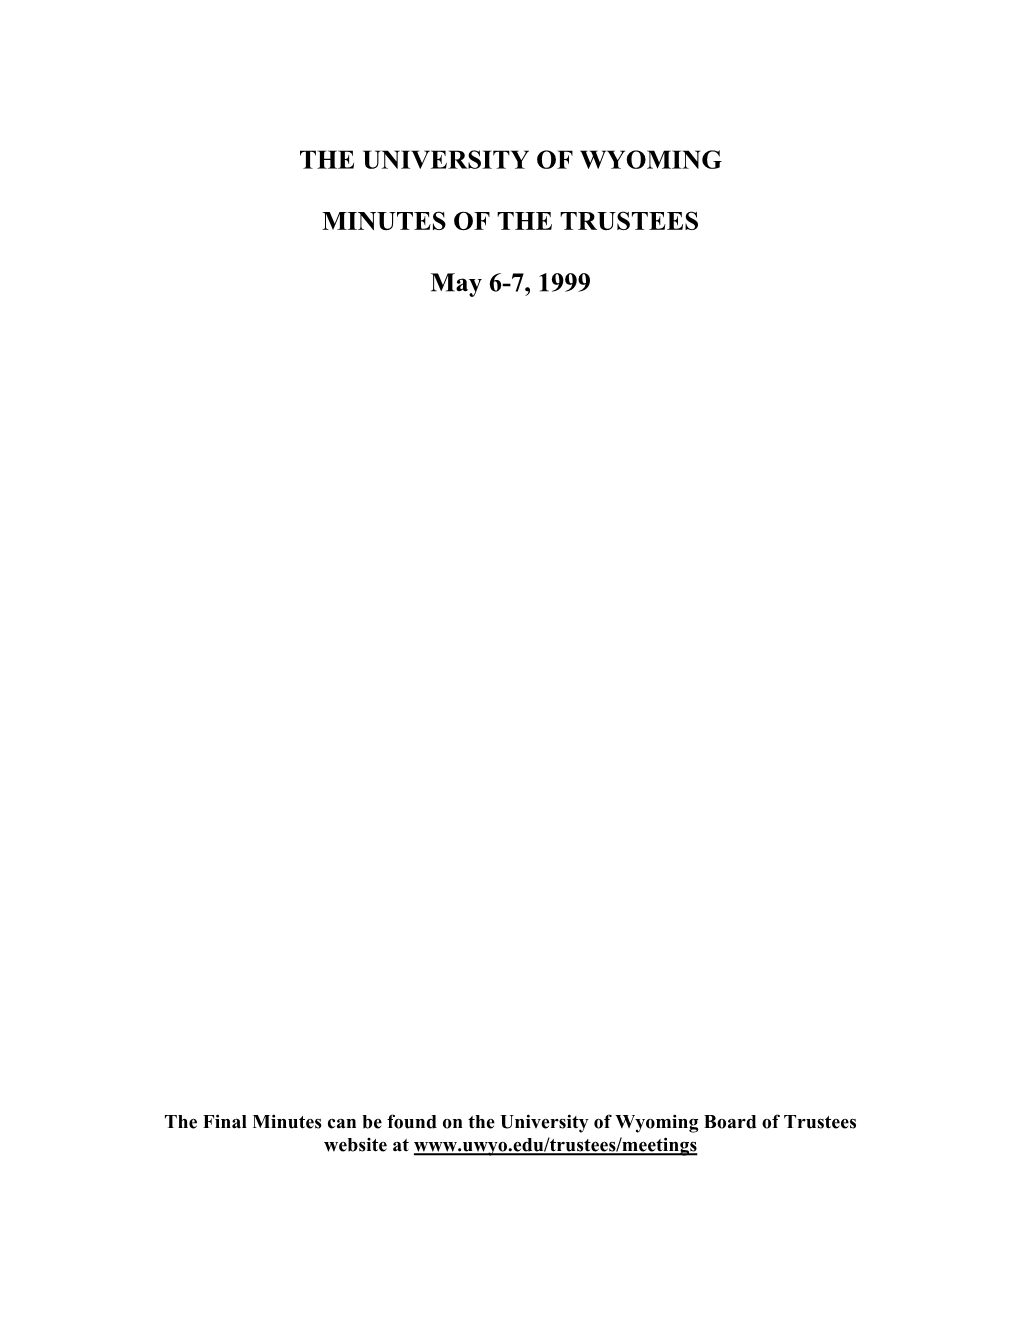 THE UNIVERSITY of WYOMING MINUTES of the TRUSTEES May 6-7, 1999